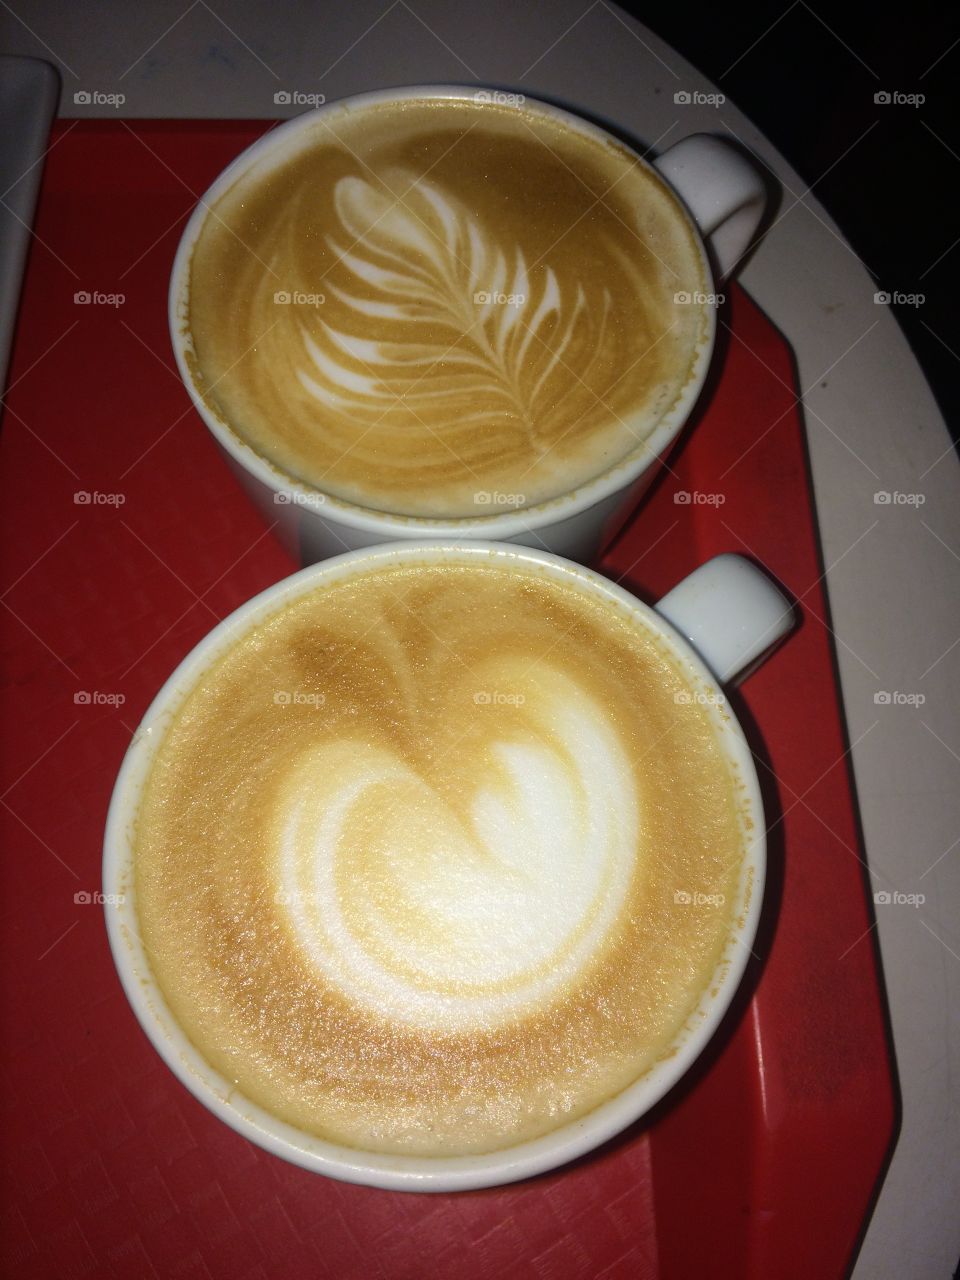 Cappuccino and Cafe latte 